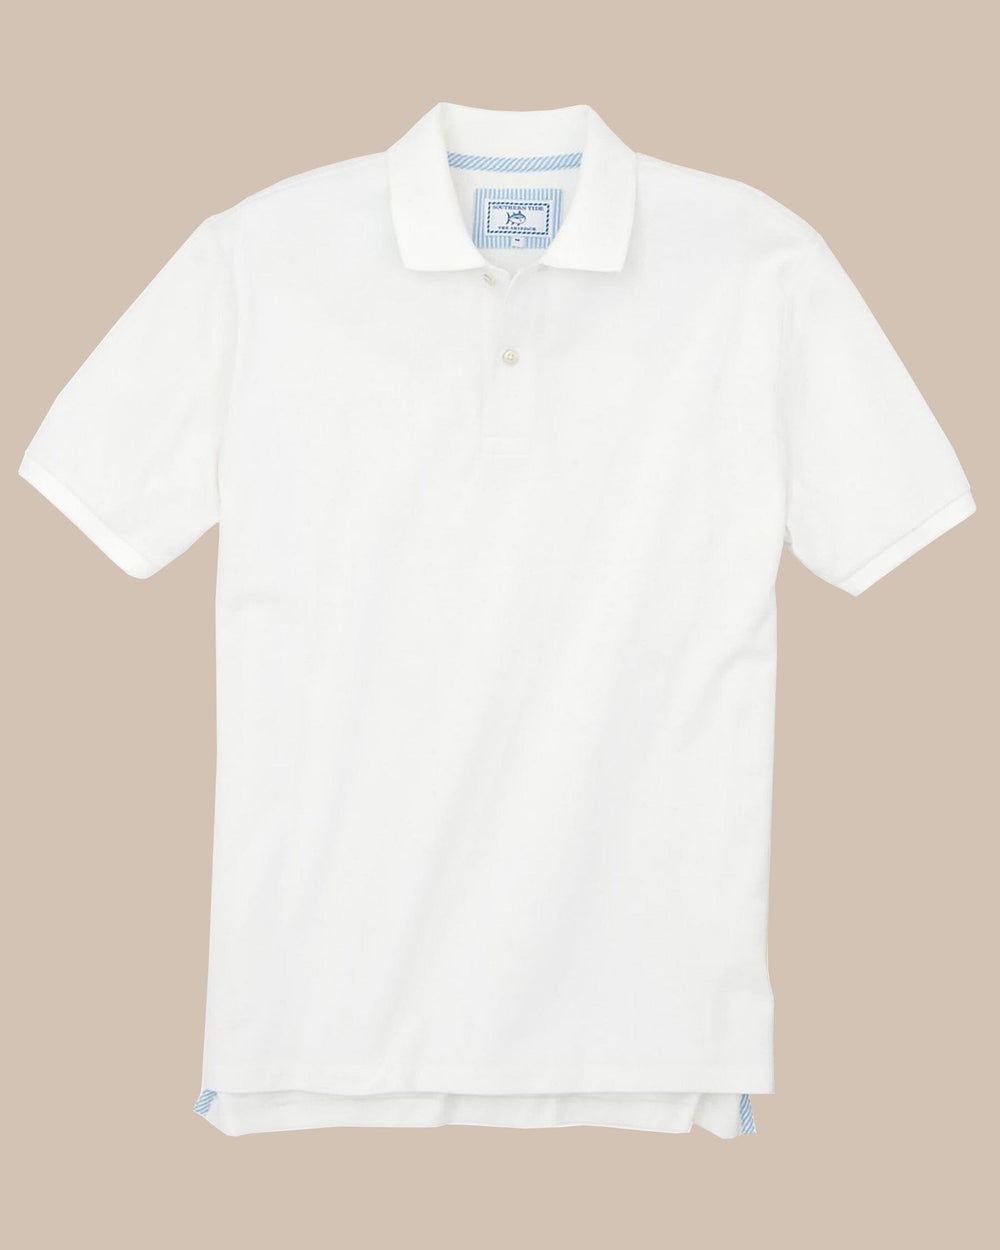 The front view of the Men's Orange Skipjack Gameday Colors Polo Shirt by Southern Tide - Classic White